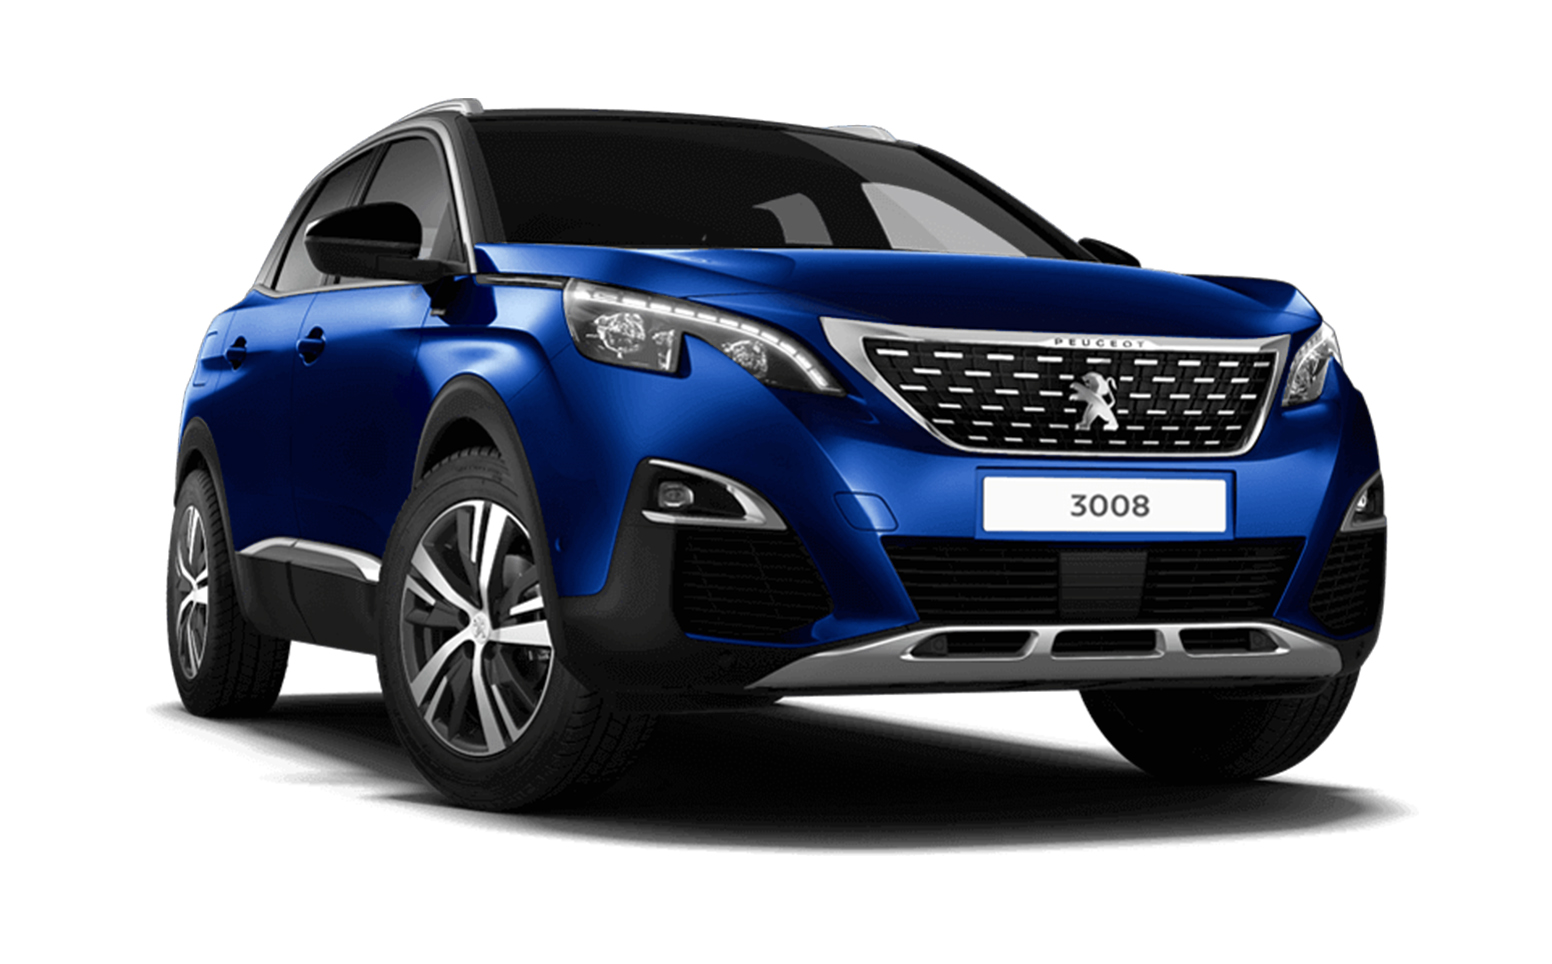 peugeot_3008_allure-16l-petrol-without-sunroof